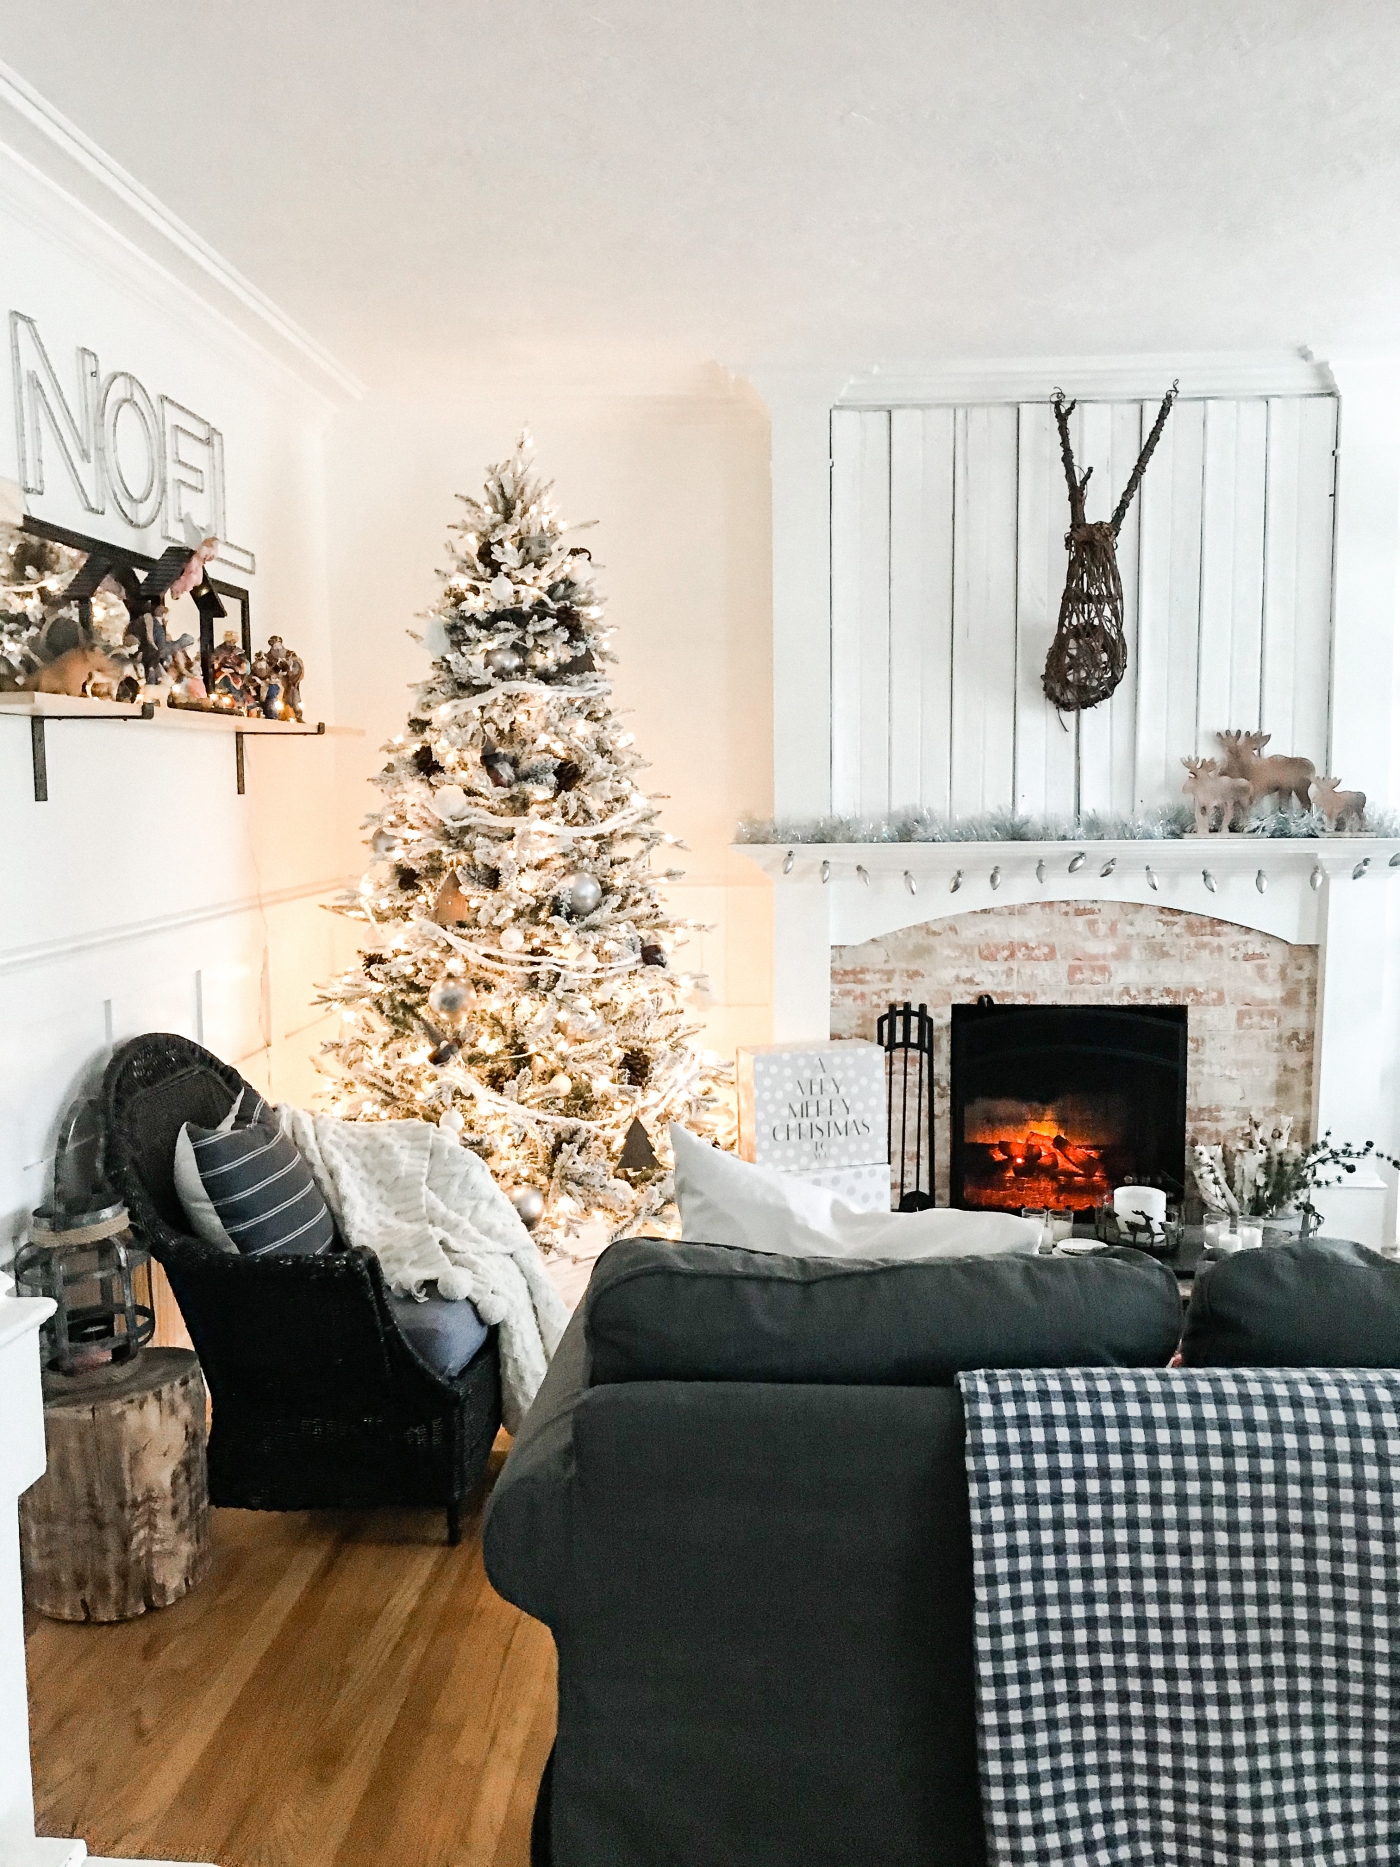 Our Christmas Living Room 2020 – Phase 1.